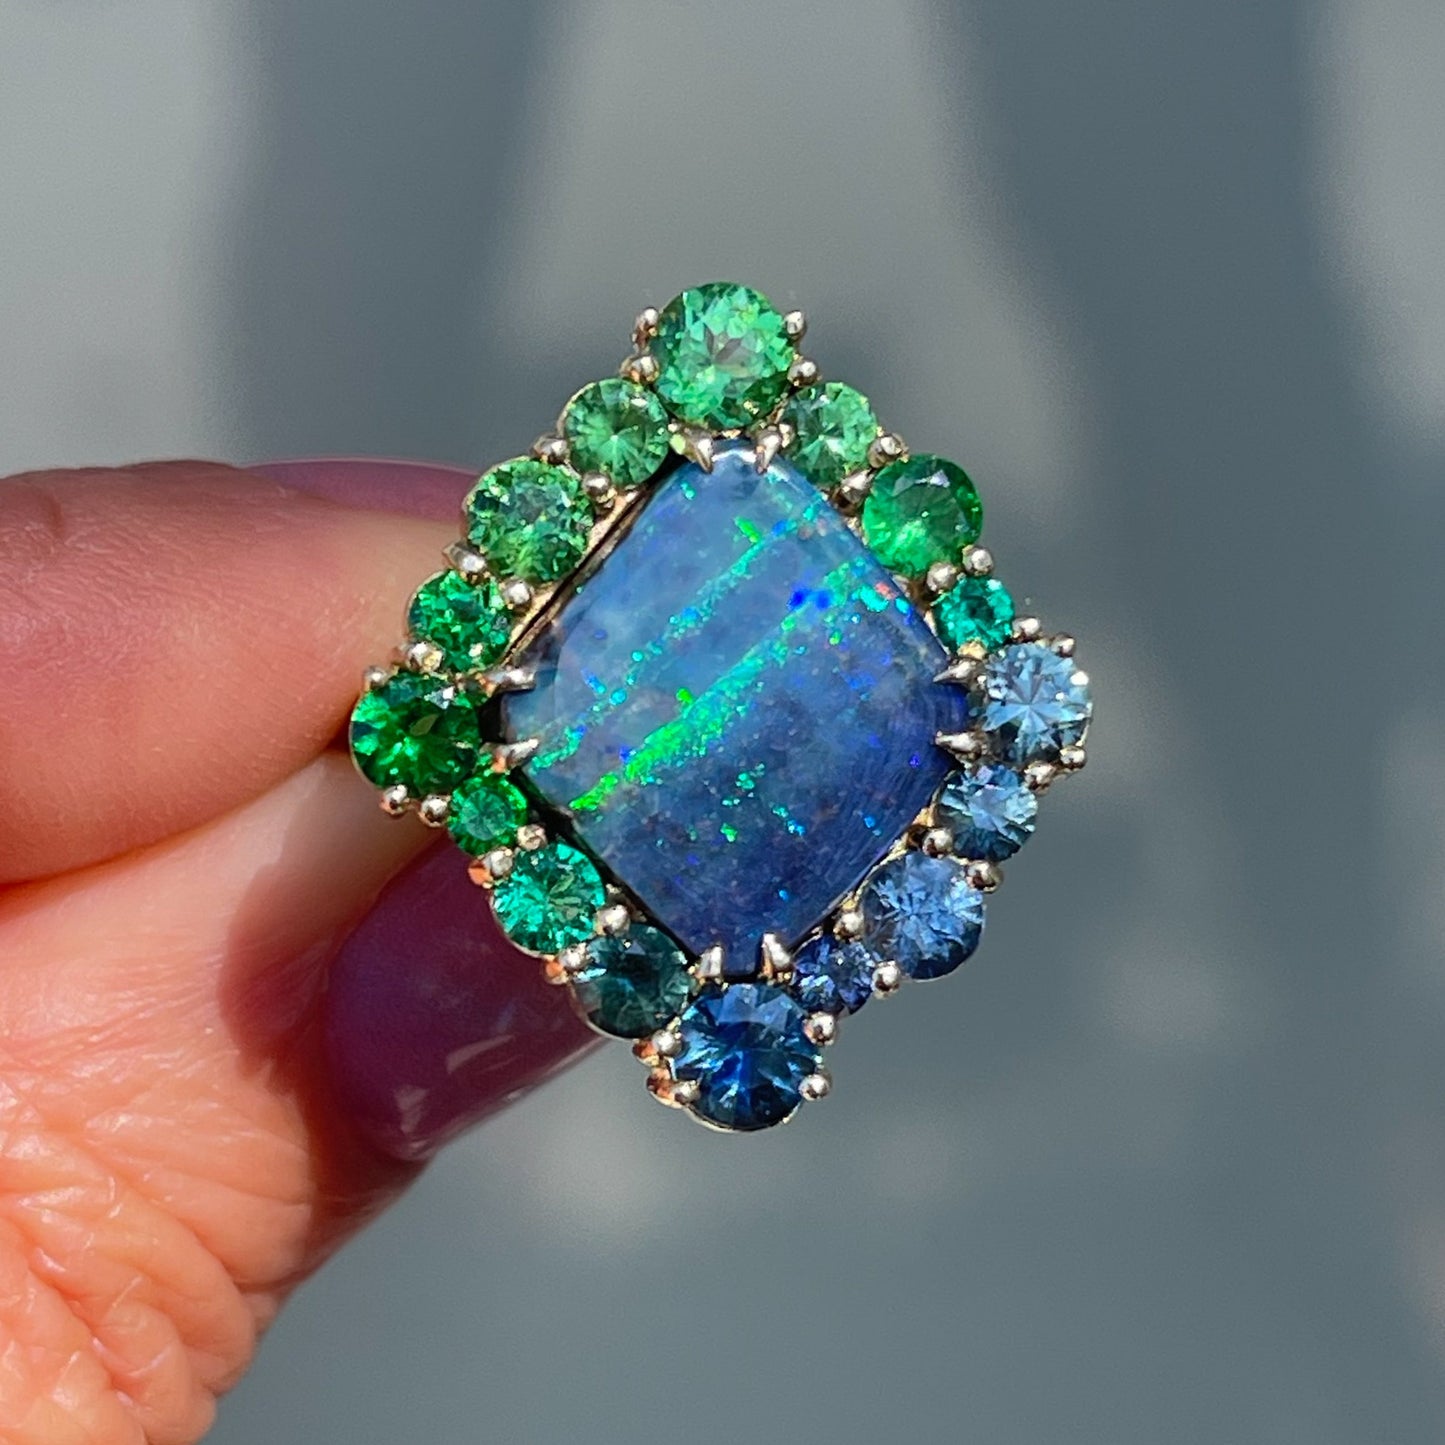 An Australian Opal Ring by NIXIN Jewelry. A gold opal ring with sapphires, emeralds and green garnets